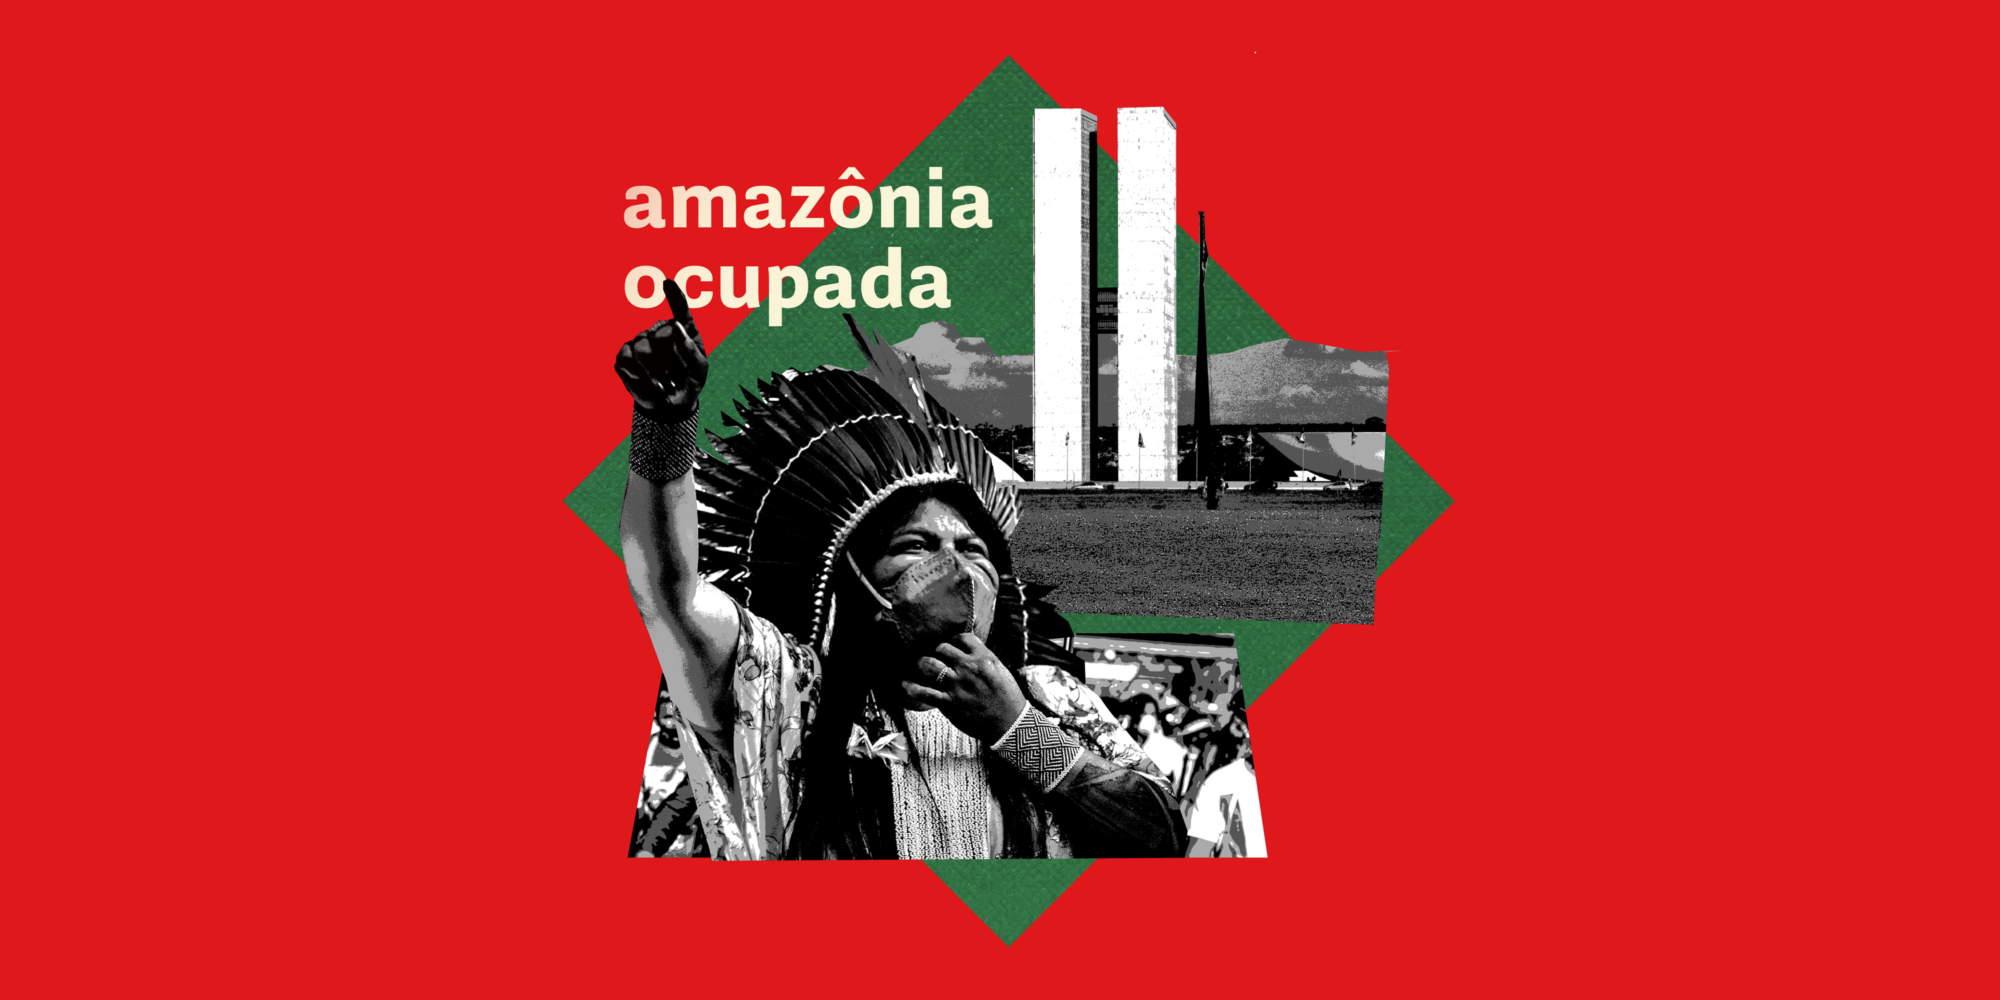 graphic showing an indigenous person in traditional dress with the caption "Amazonía ocupada" 